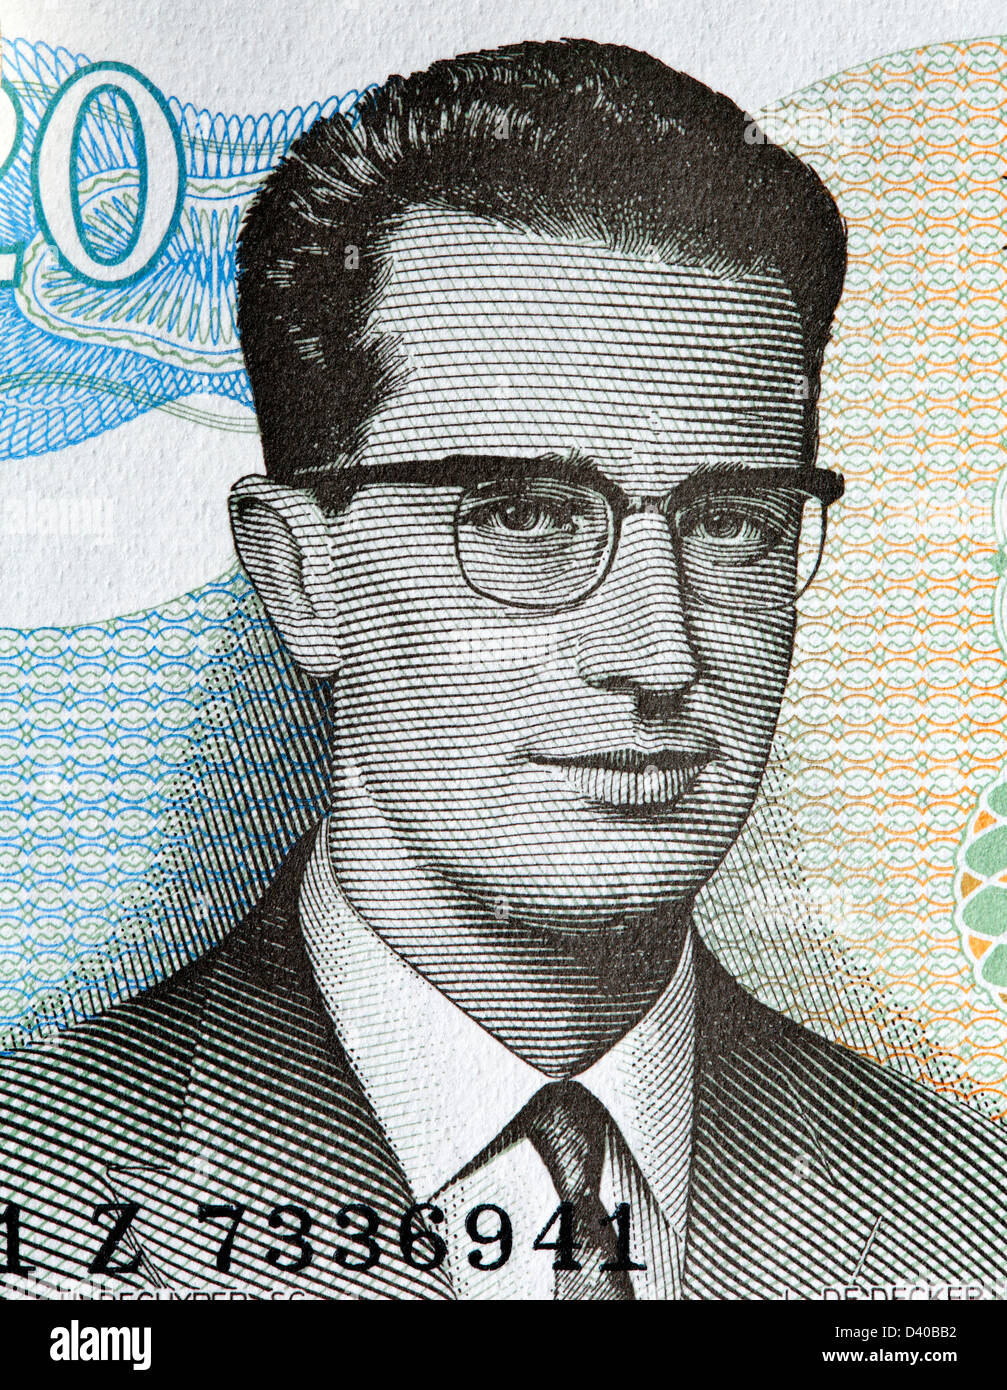 Portrait of King Baudouin I from 20 Francs banknote, Belgium, 1964 Stock Photo